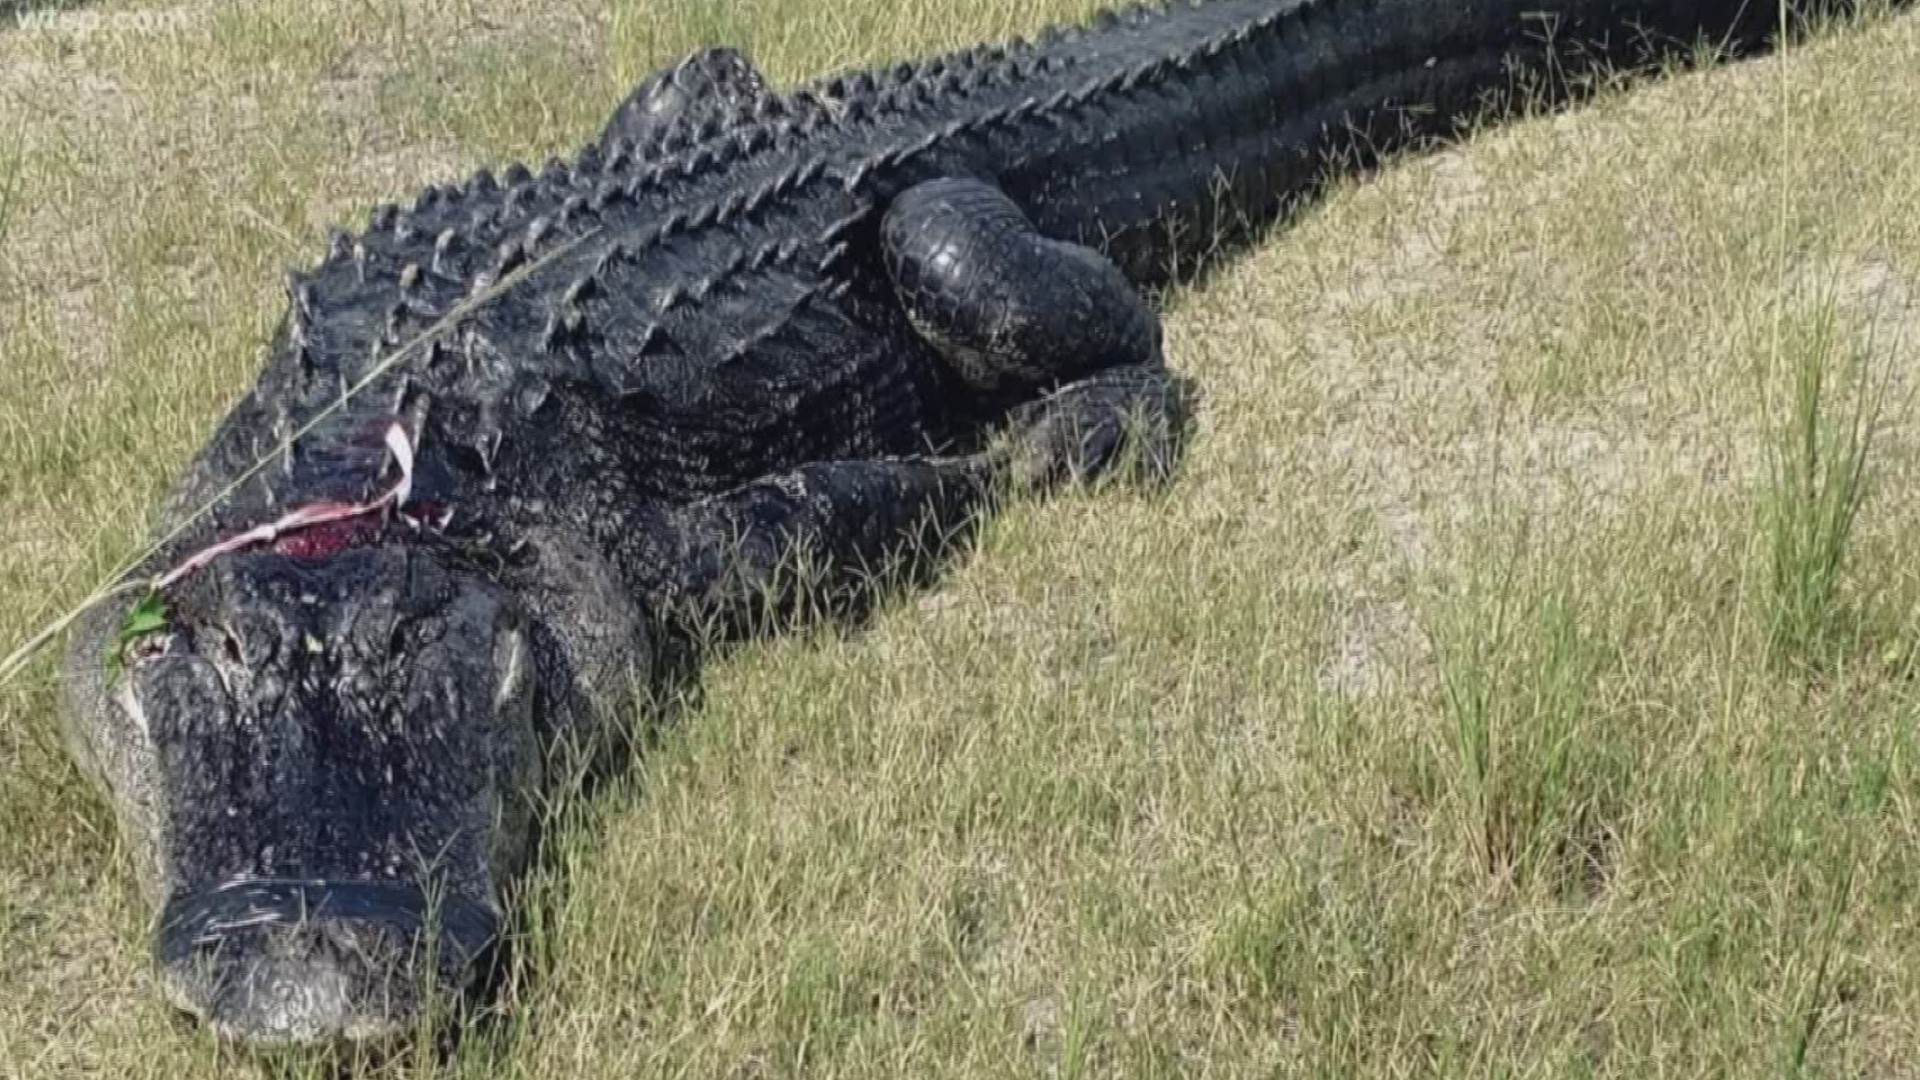 The Polk County Sheriff’s Office has now confirmed a 45-year-old man’s body, found earlier this week, was partially eaten by an alligator.

The body was found floating in the water Thursday on the property of The Mosaic Co., which does mining along Highway 630 just west of Fort Meade.Deputies said a company employee saw the 11-foot, 10-inch gator had part of the man's body in its mouth. The 449-pound reptile released the body by the time law enforcement showed up.

The Florida Fish and Wildlife Conservation Commission trapped and killed the gator. A necropsy revealed the man's hand and foot were still inside the gator.

An autopsy showed the victim had other lacerations and injuries caused by the alligator. However, according to authorities, his apparent cause of death is drowning, pending a final toxicology report.

Deputies identified the victim as Michael Ford II.

The Mosaic Company said Mr. Ford was not an employee.